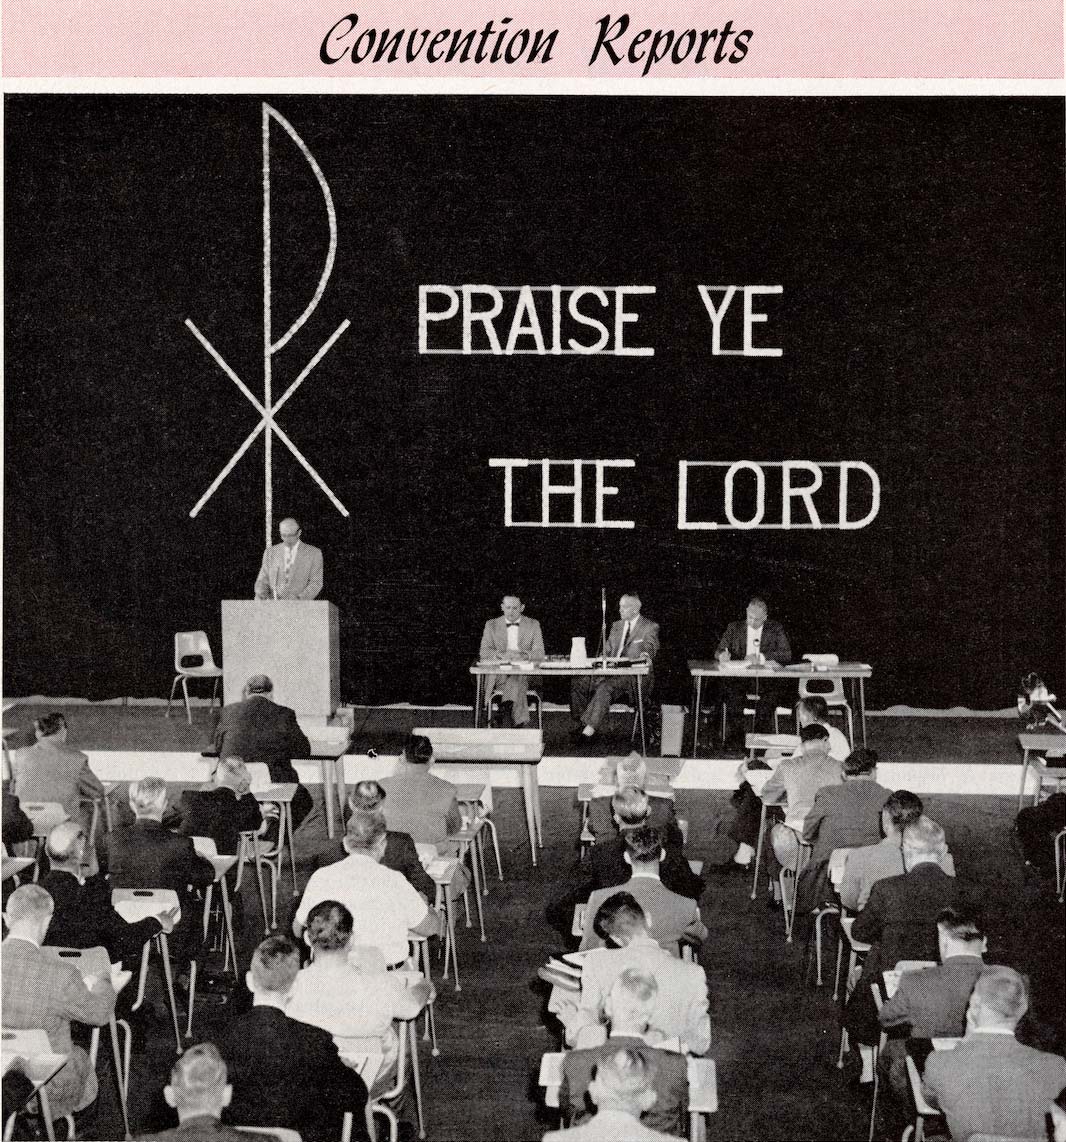 Men sitting in desks at synod convention, 1961